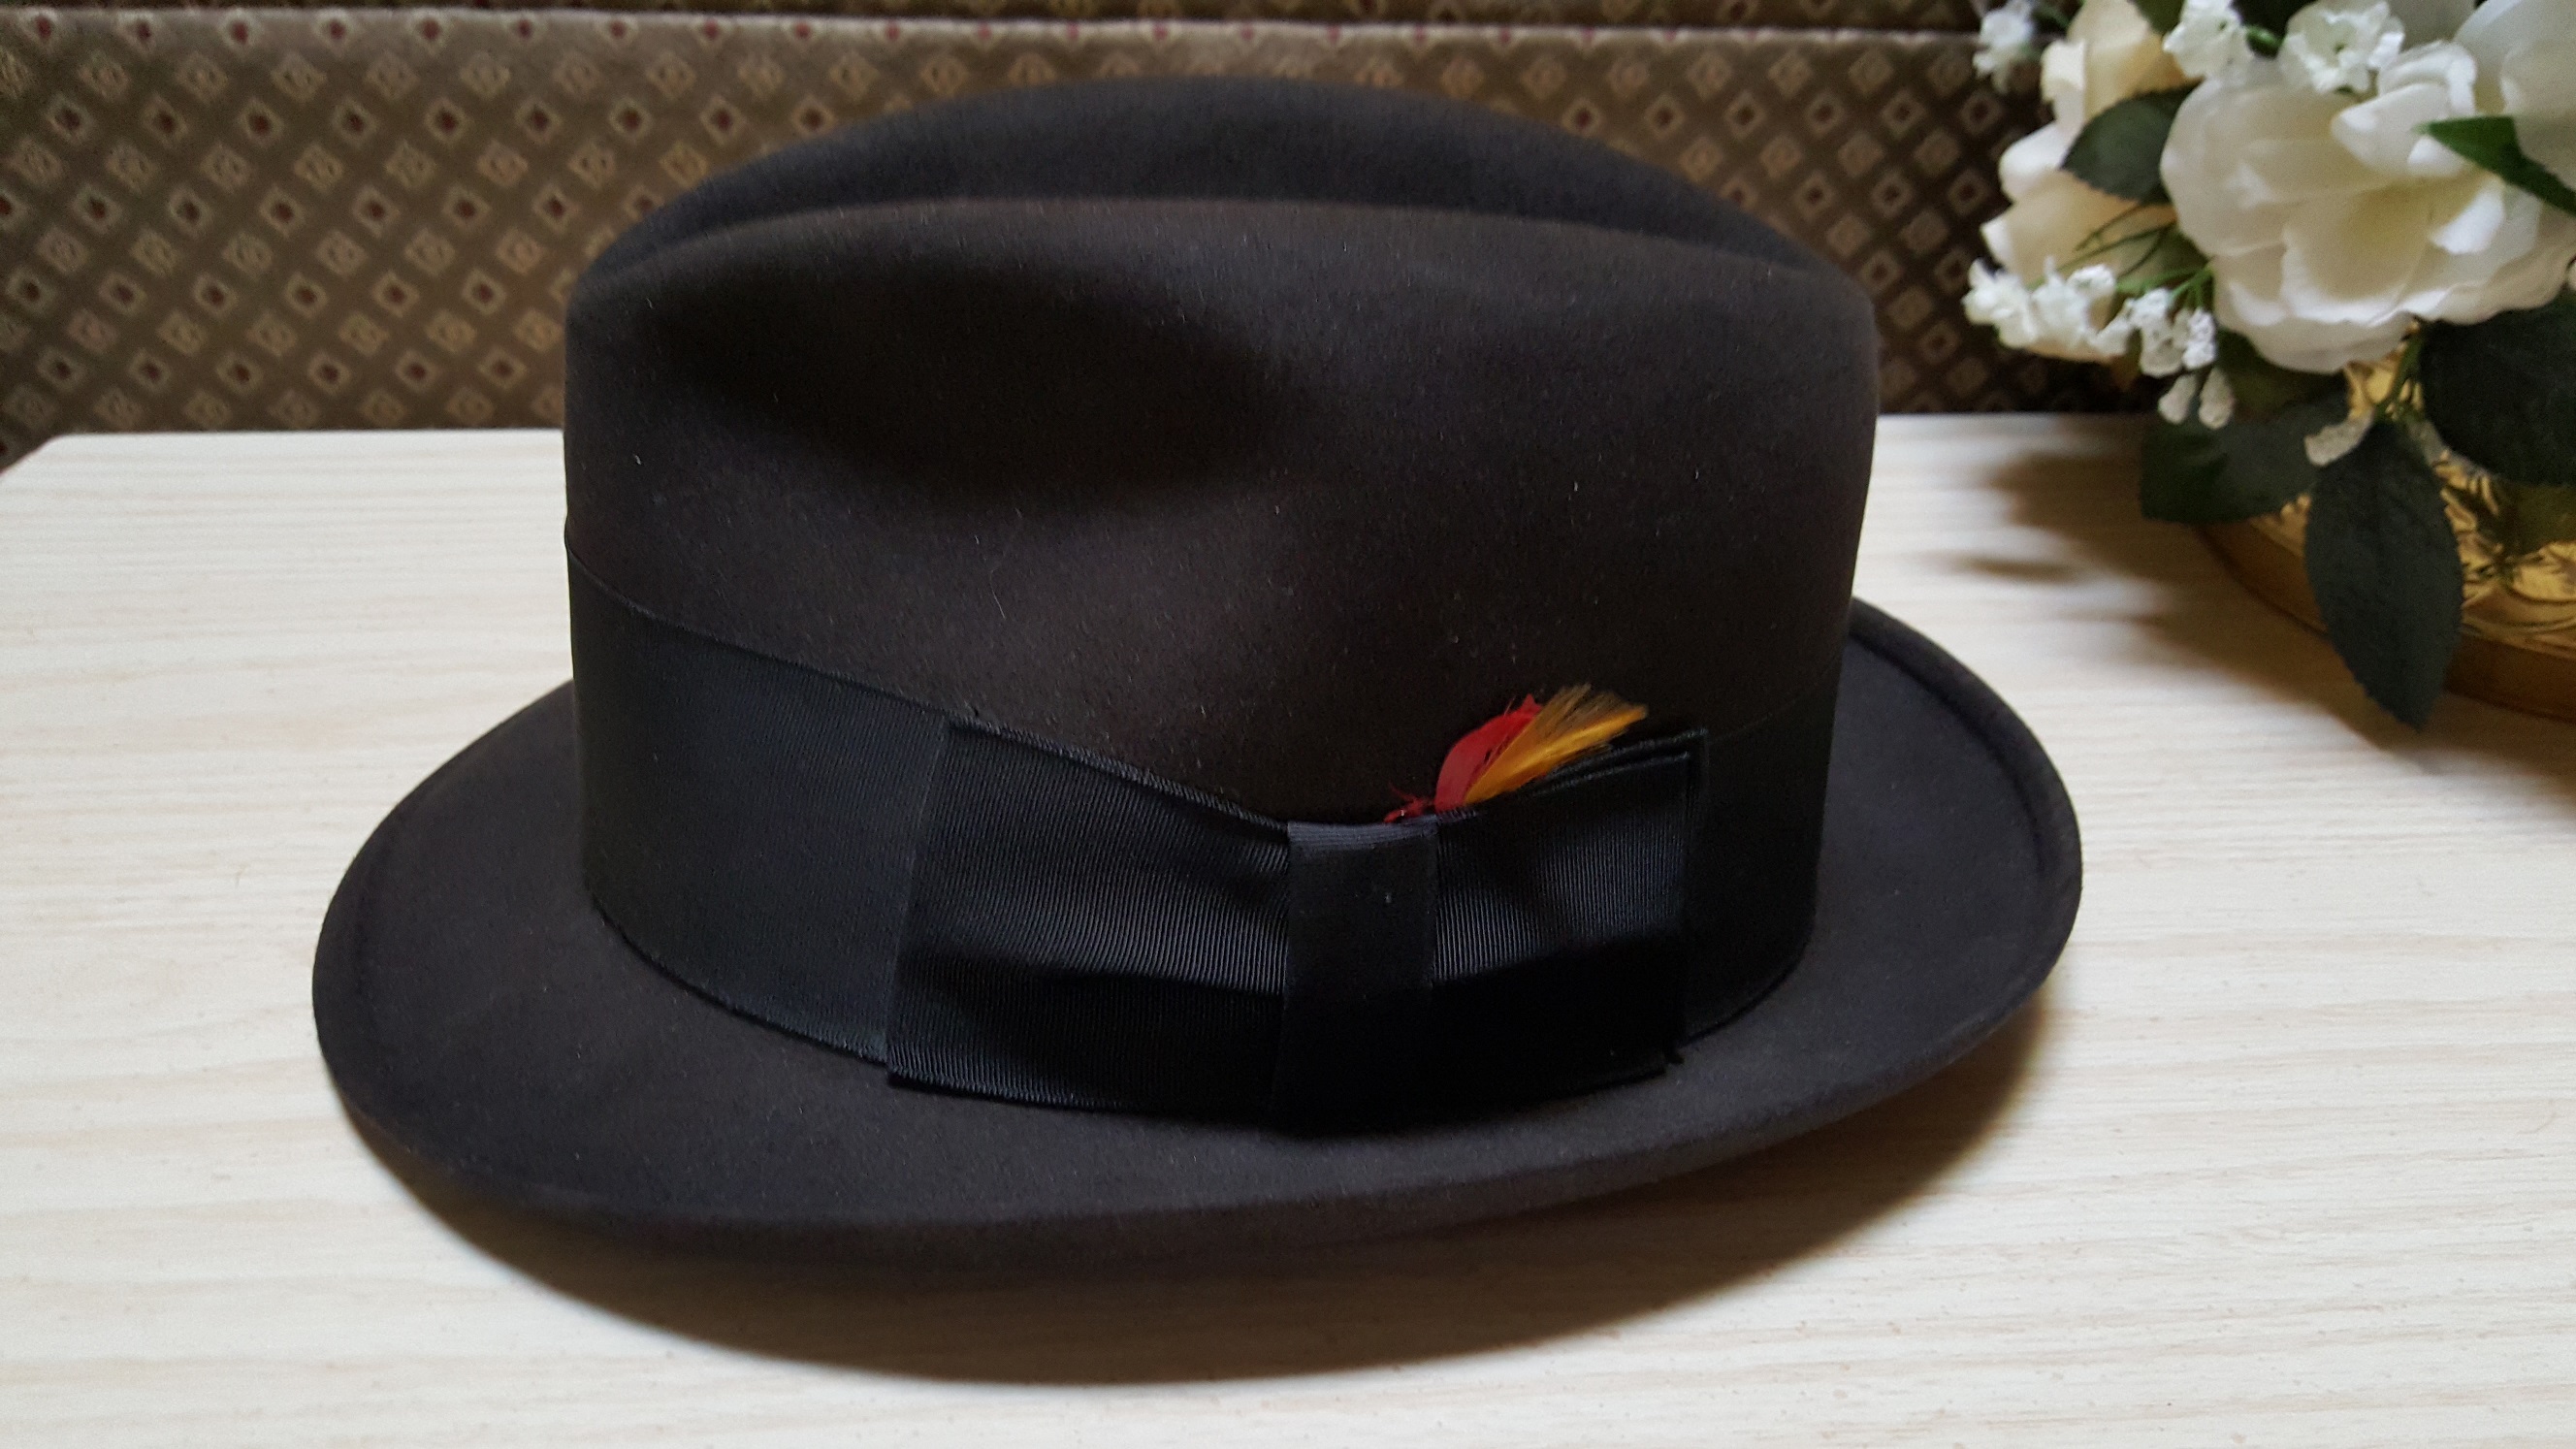 hat pict 1 cropped.jpg